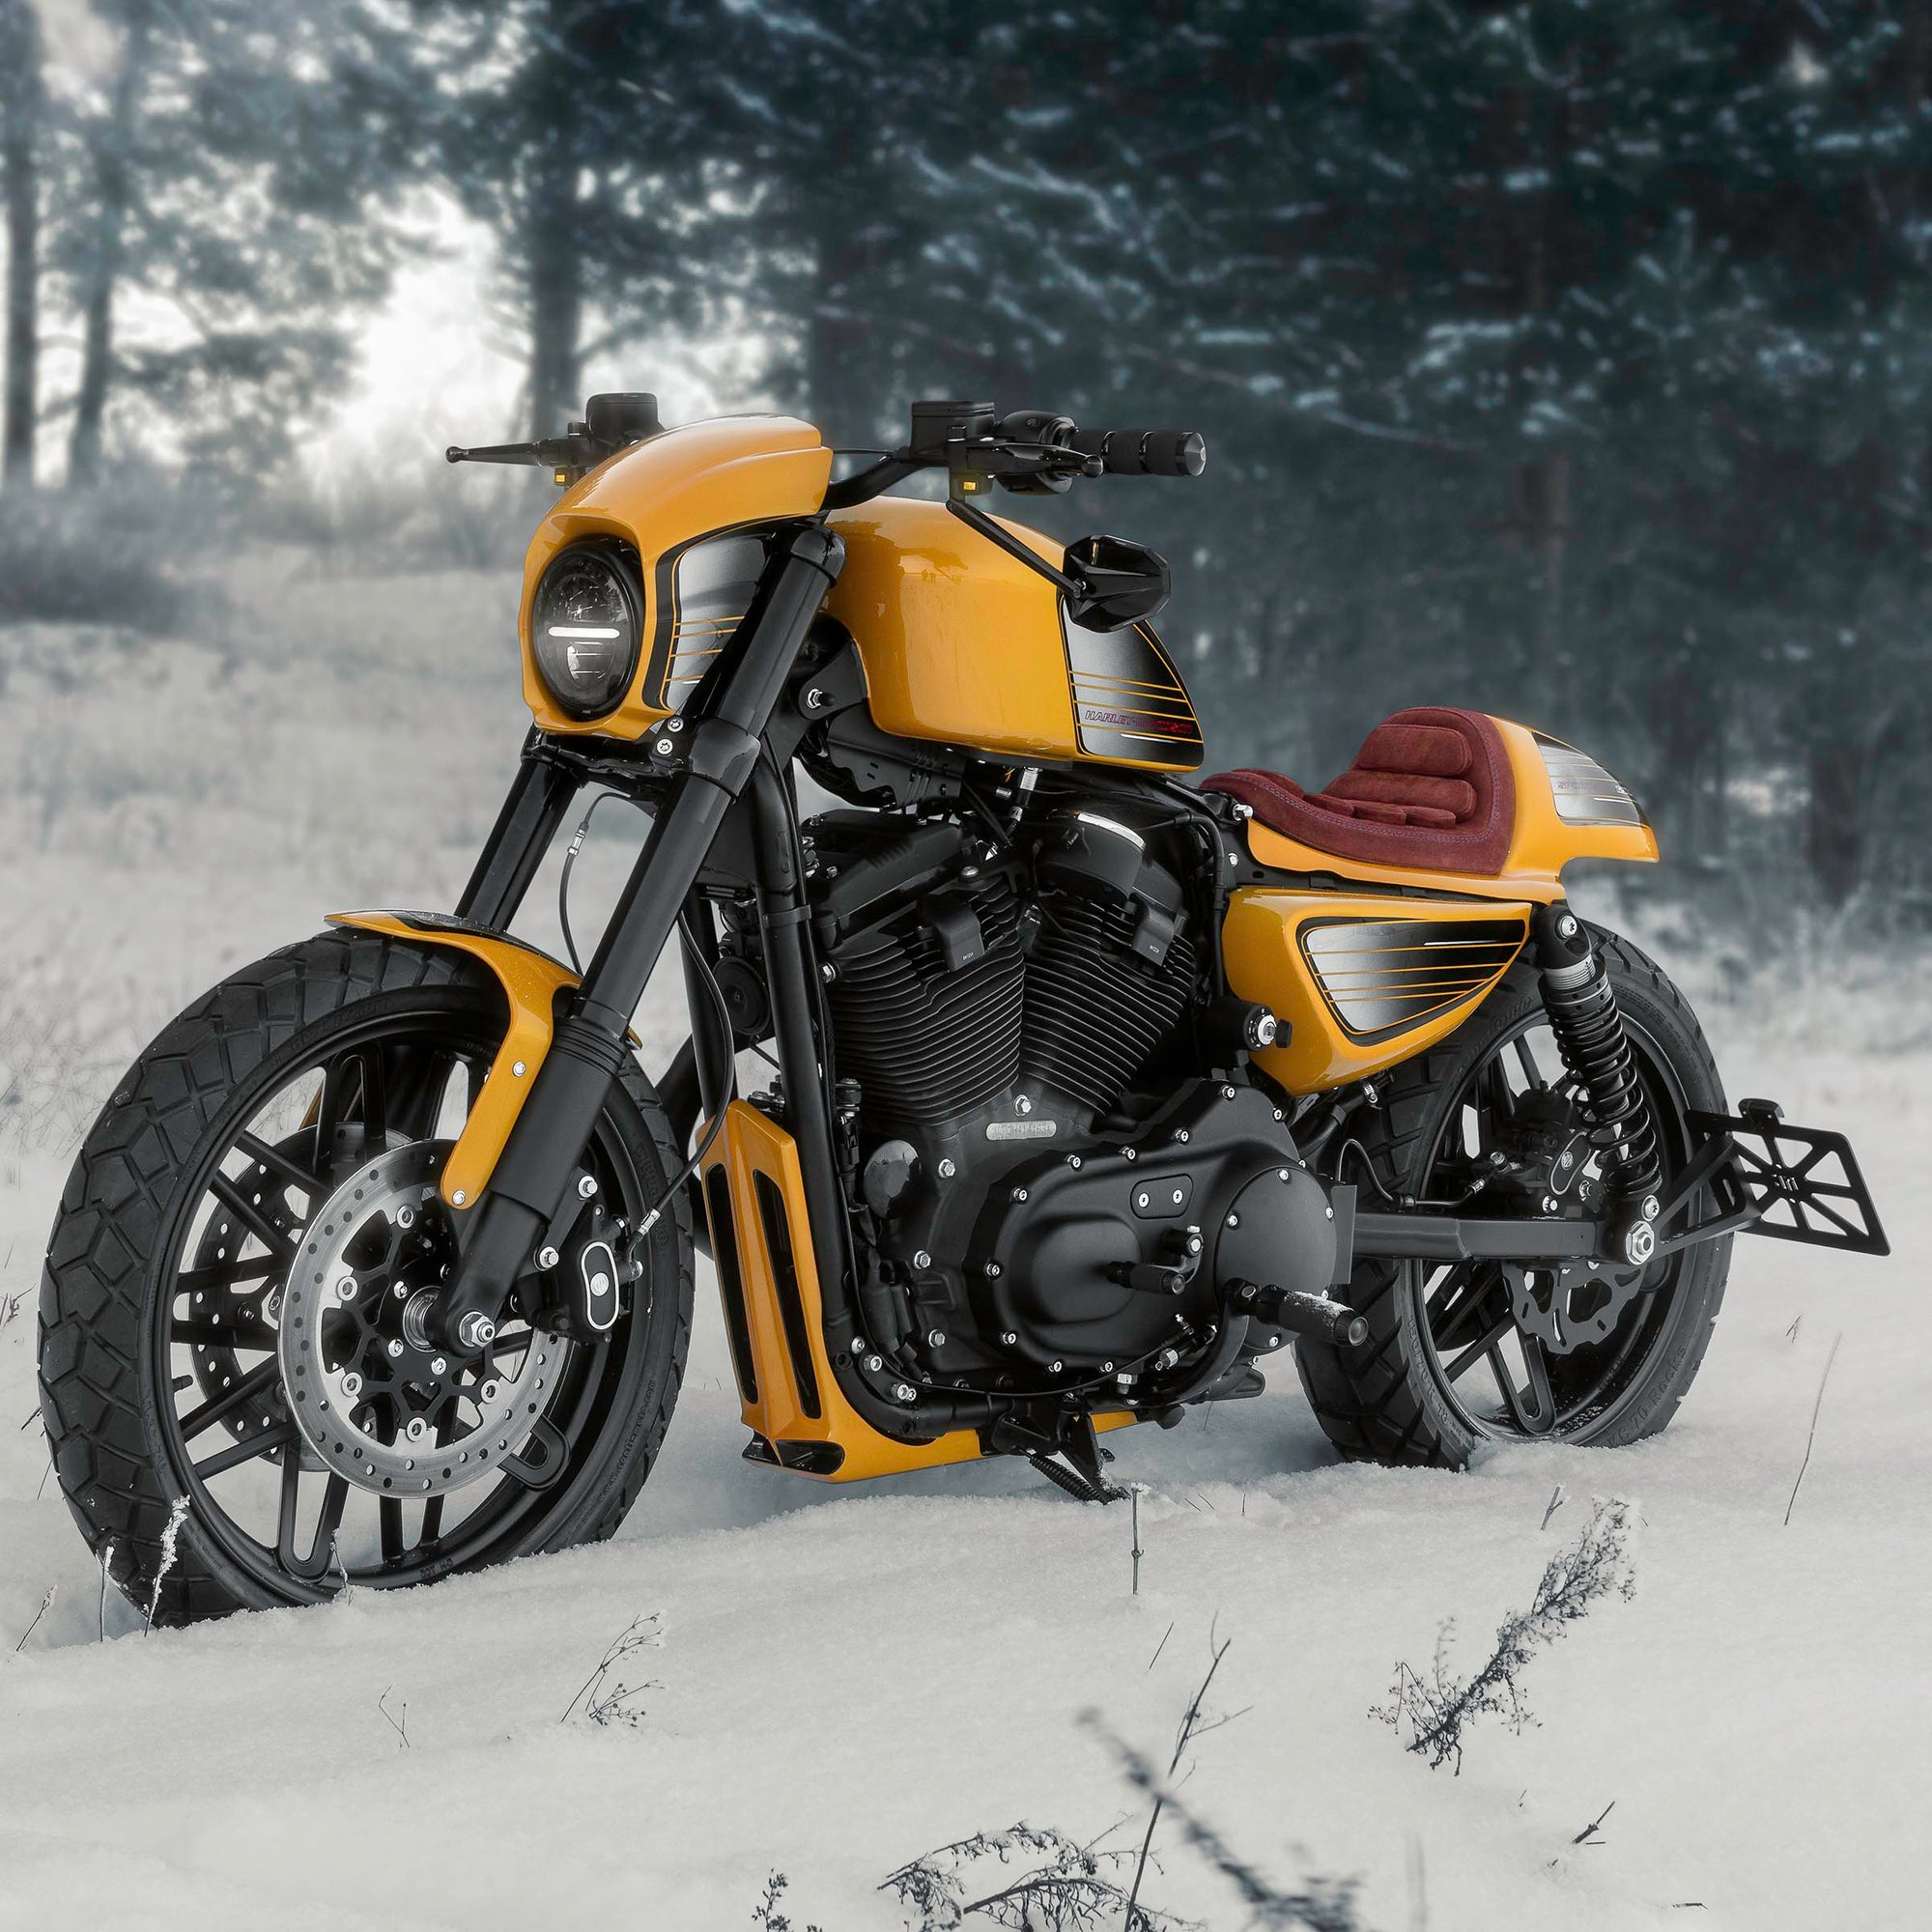 Modified Harley Davidson Roadster motorcycle with Killer Custom parts from the side in winter with some snowy trees in the background